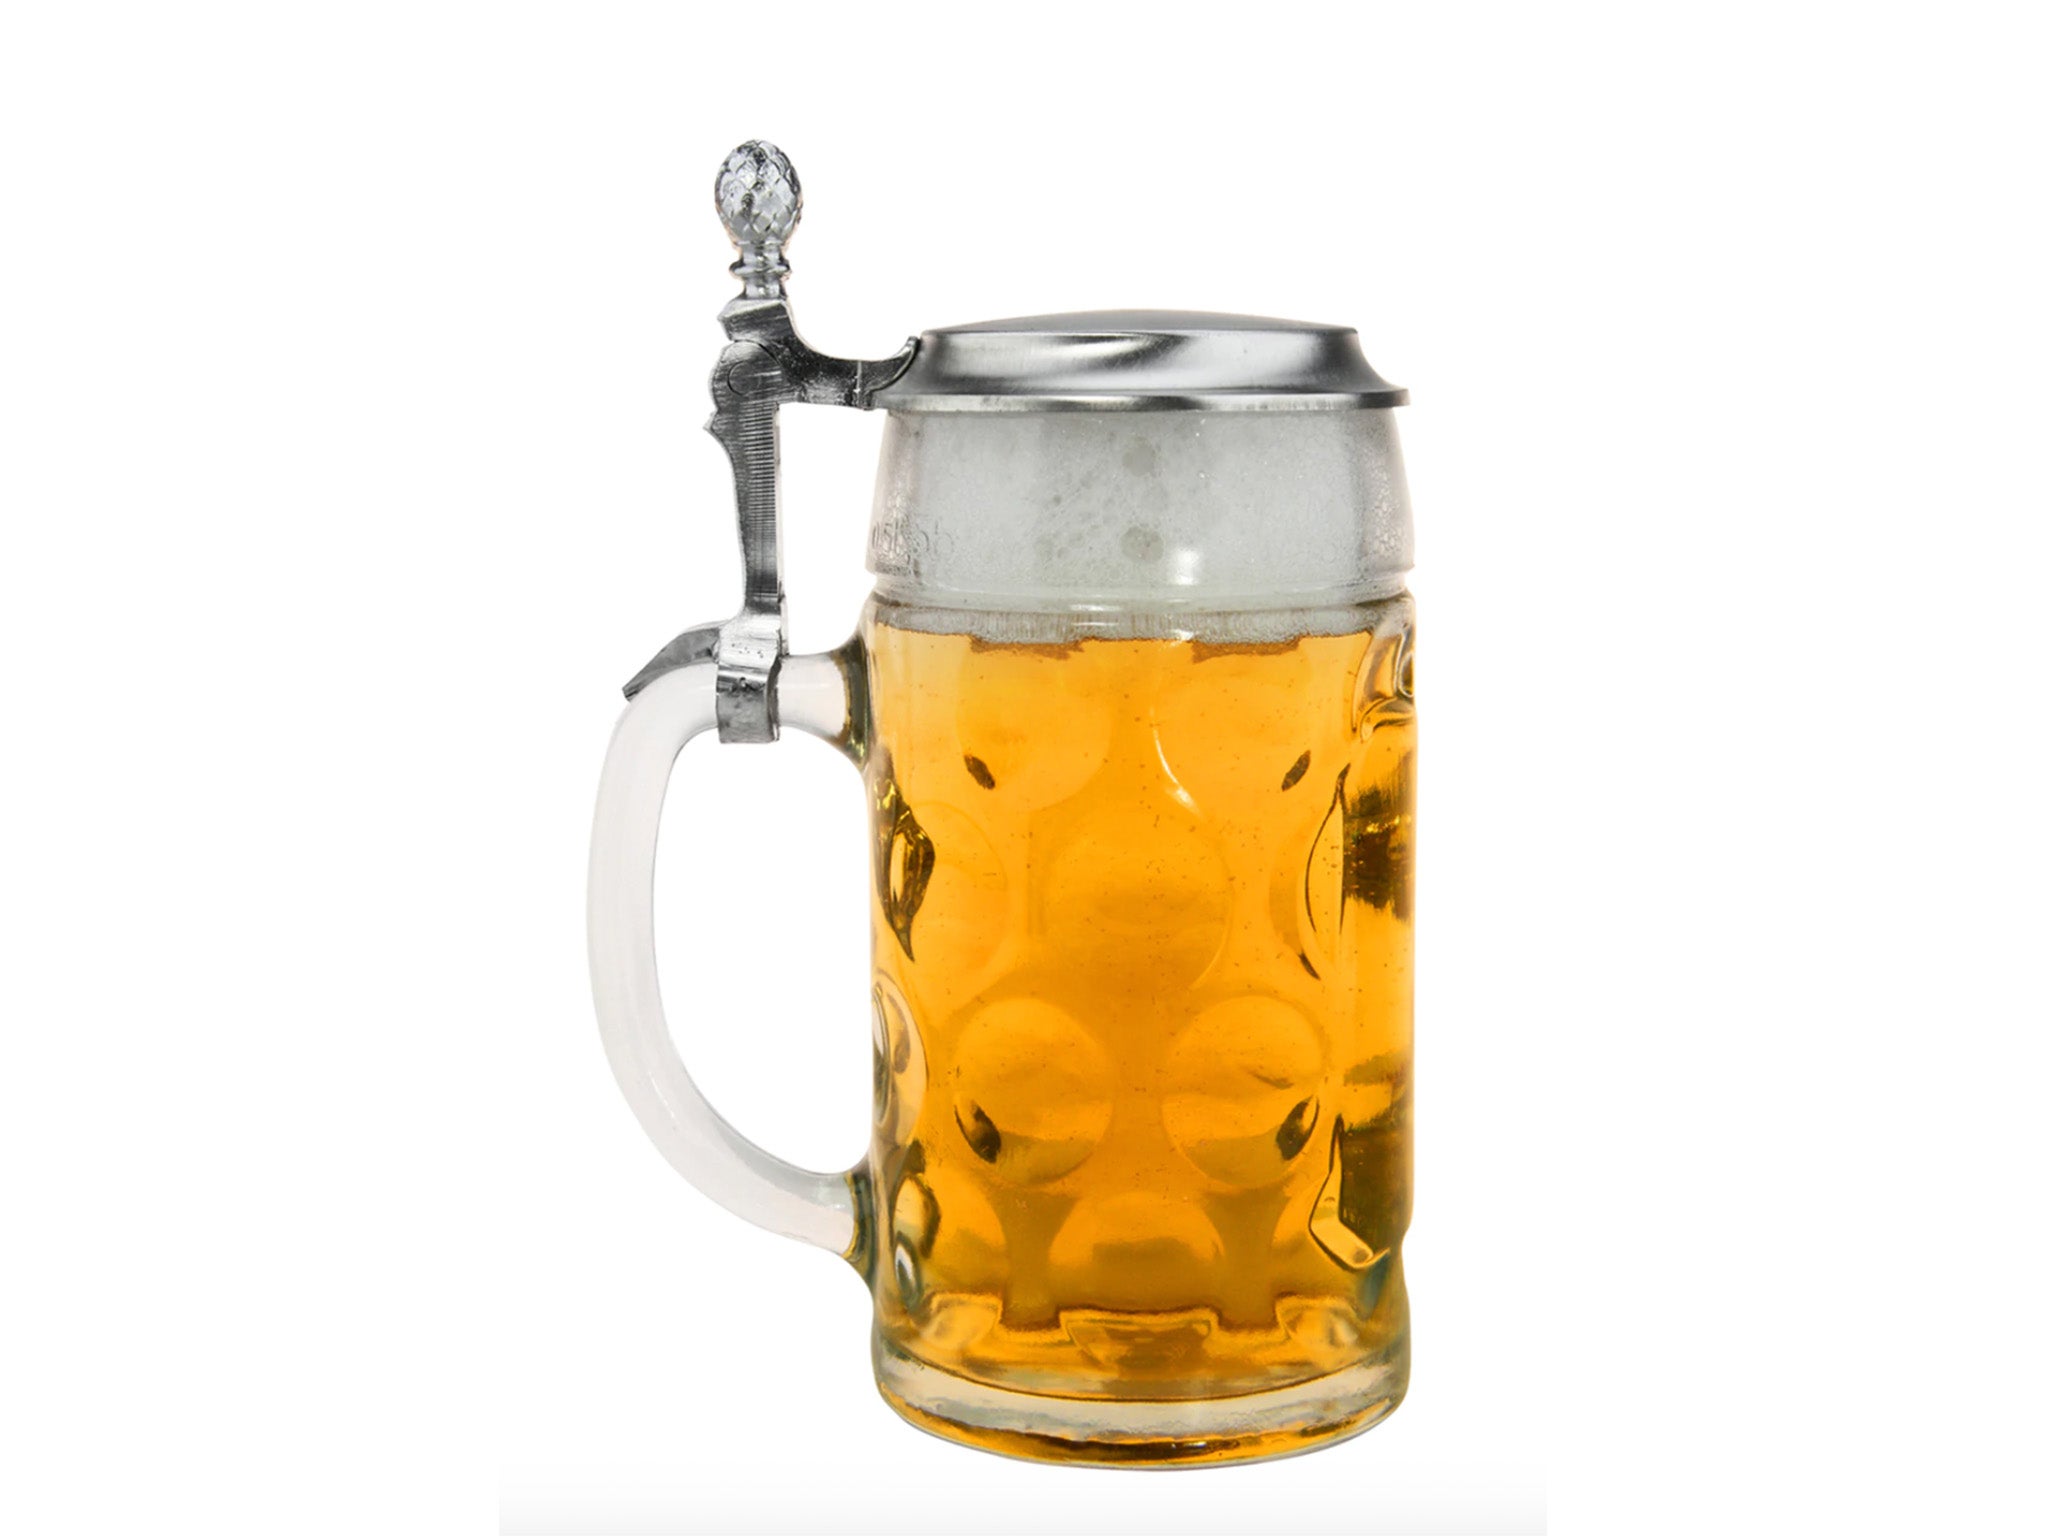 Drinking from a stein glass is the closest you can get to Oktoberfest from home